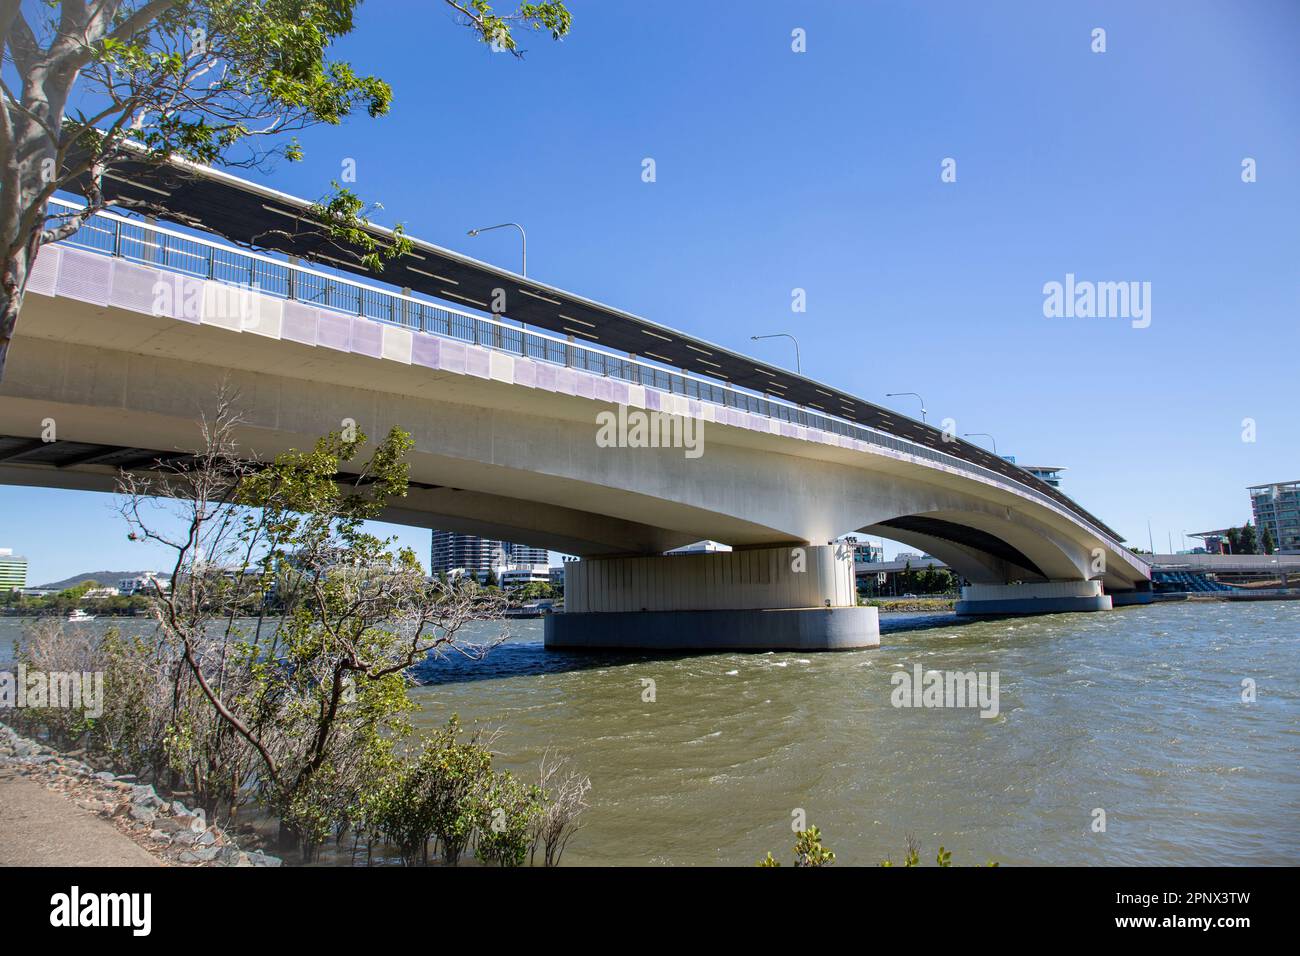 The Go Between Bridge is toll bridge for vehicles, pedestrians and cyclists over the Brisbane River opened in July 2010. Stock Photo